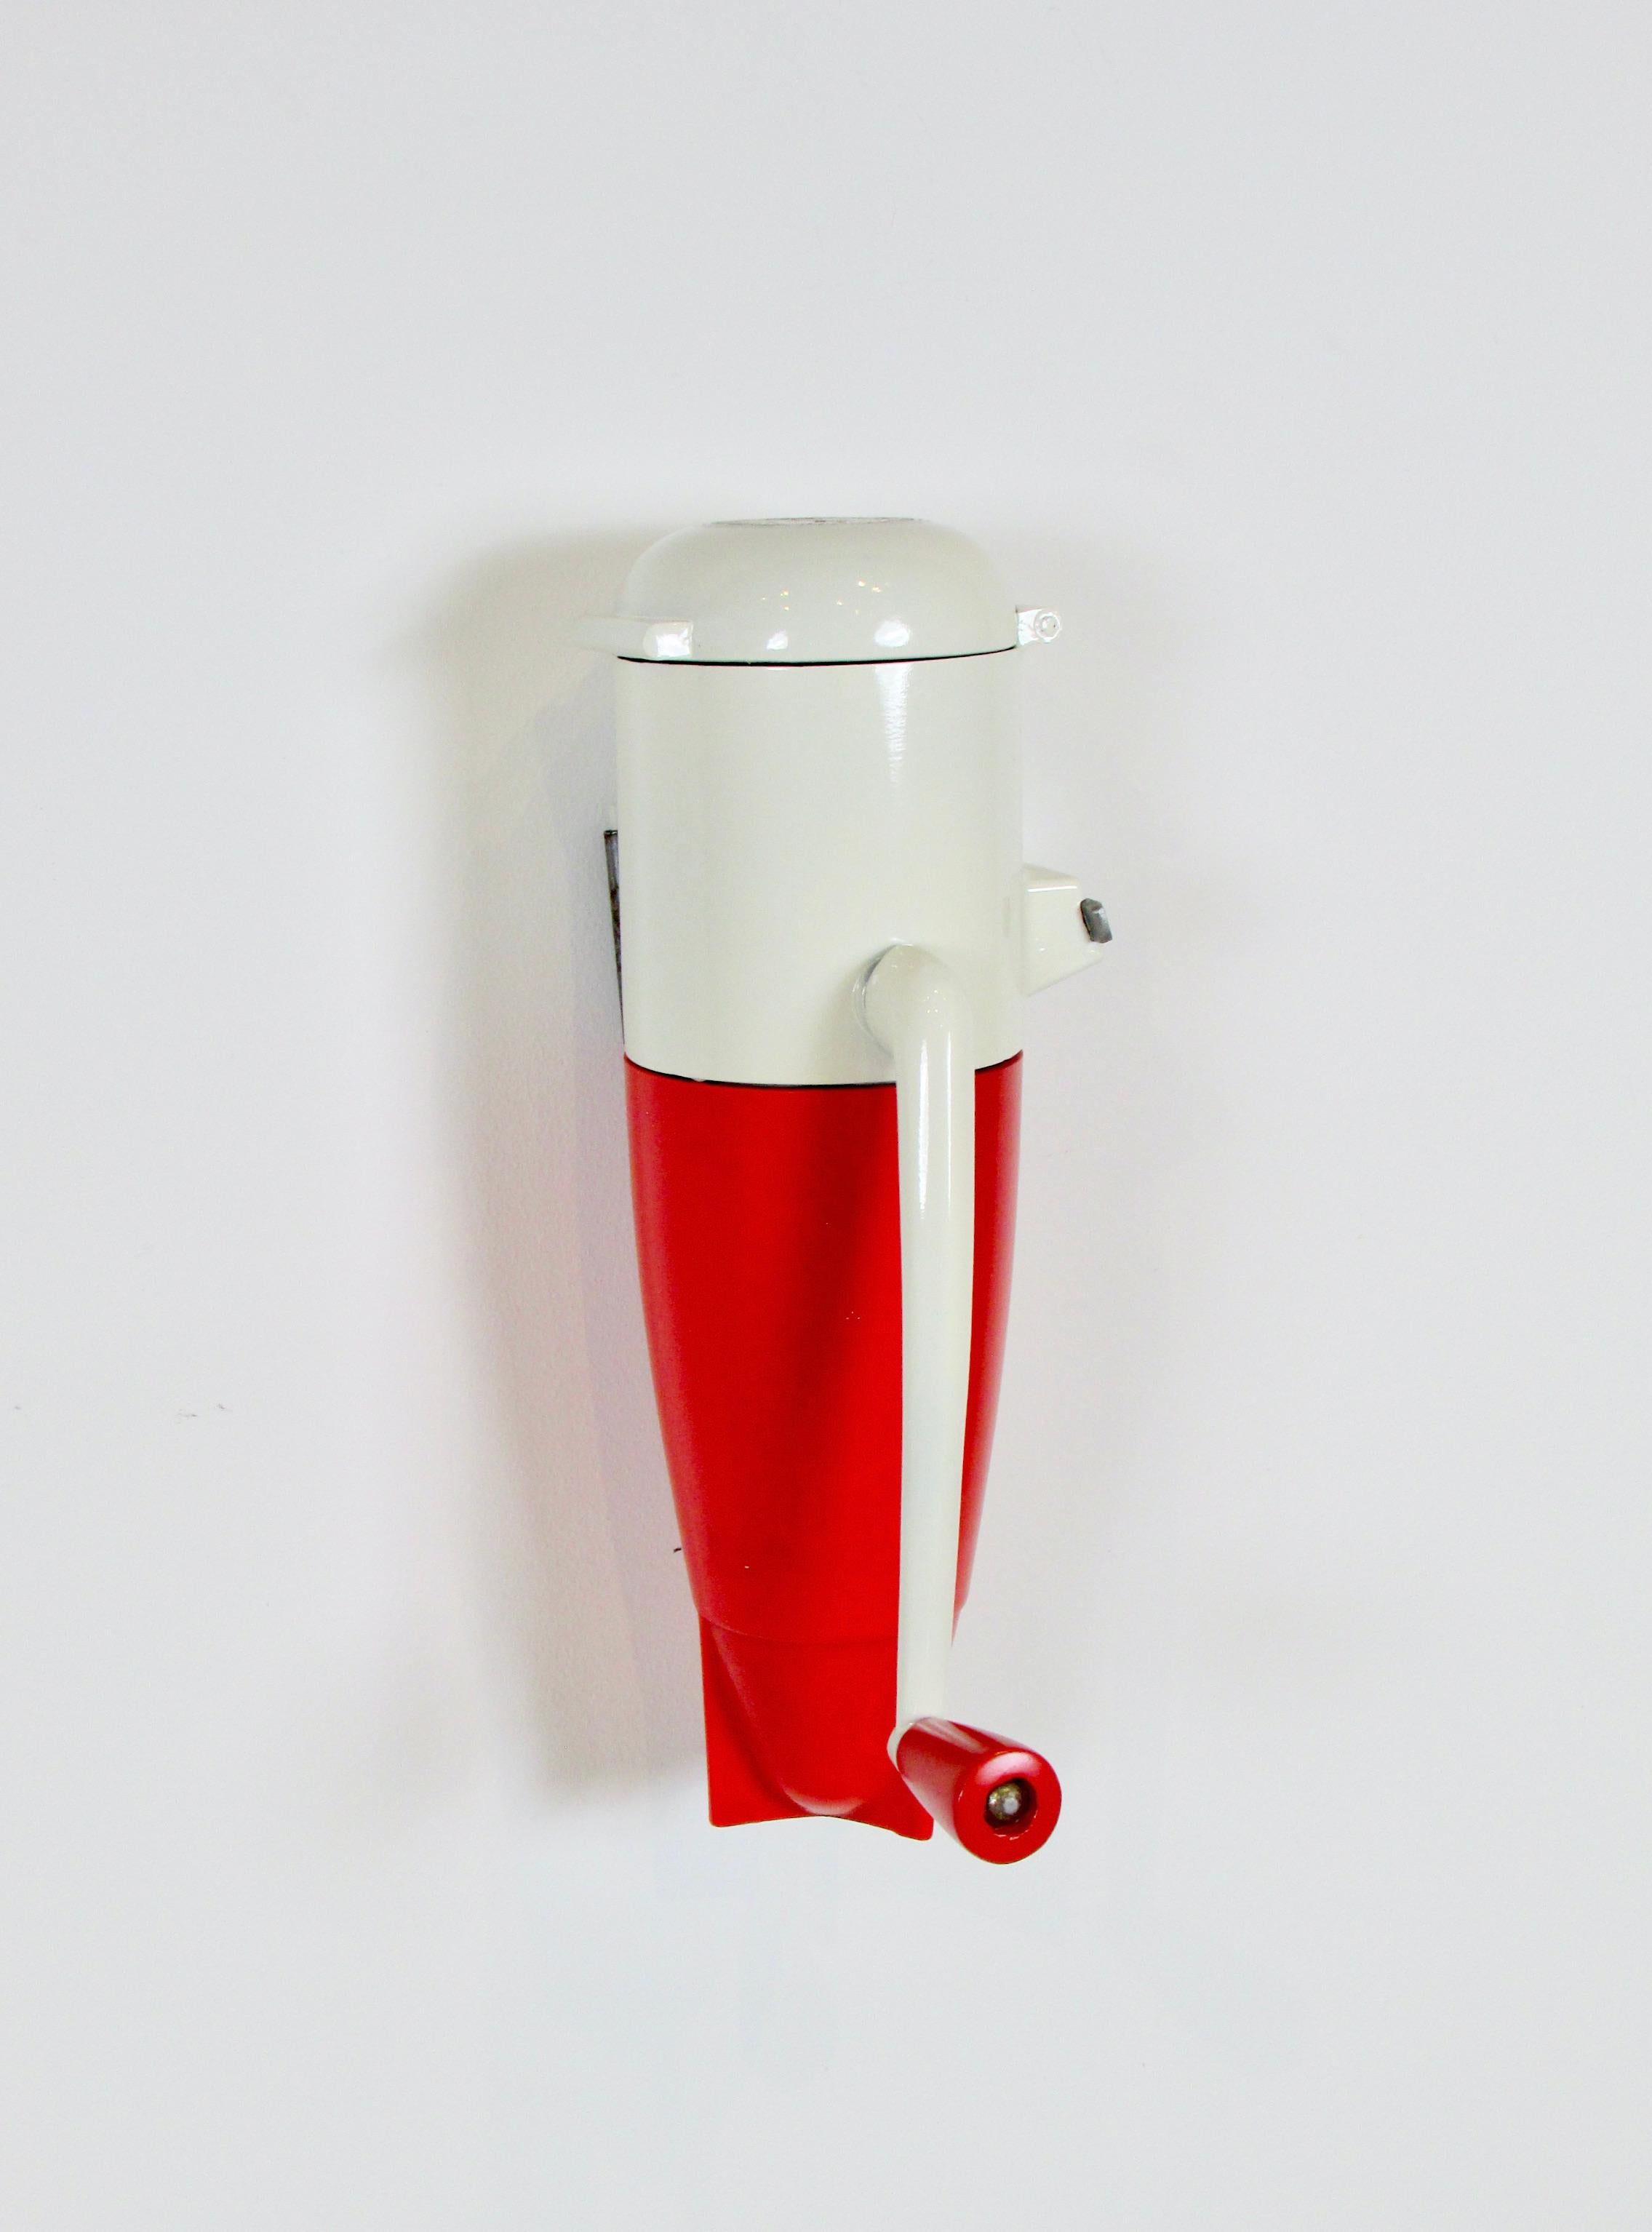 Streamlined wall mount Dazey ice crusher. Designed by Jean Otis Reinicke for Dazey Churn and Nfr. Co. 1938. Upper body has been refinished . Retains partial water decal on top of lid . Red plastic base is original and in fine condition . Wall mount